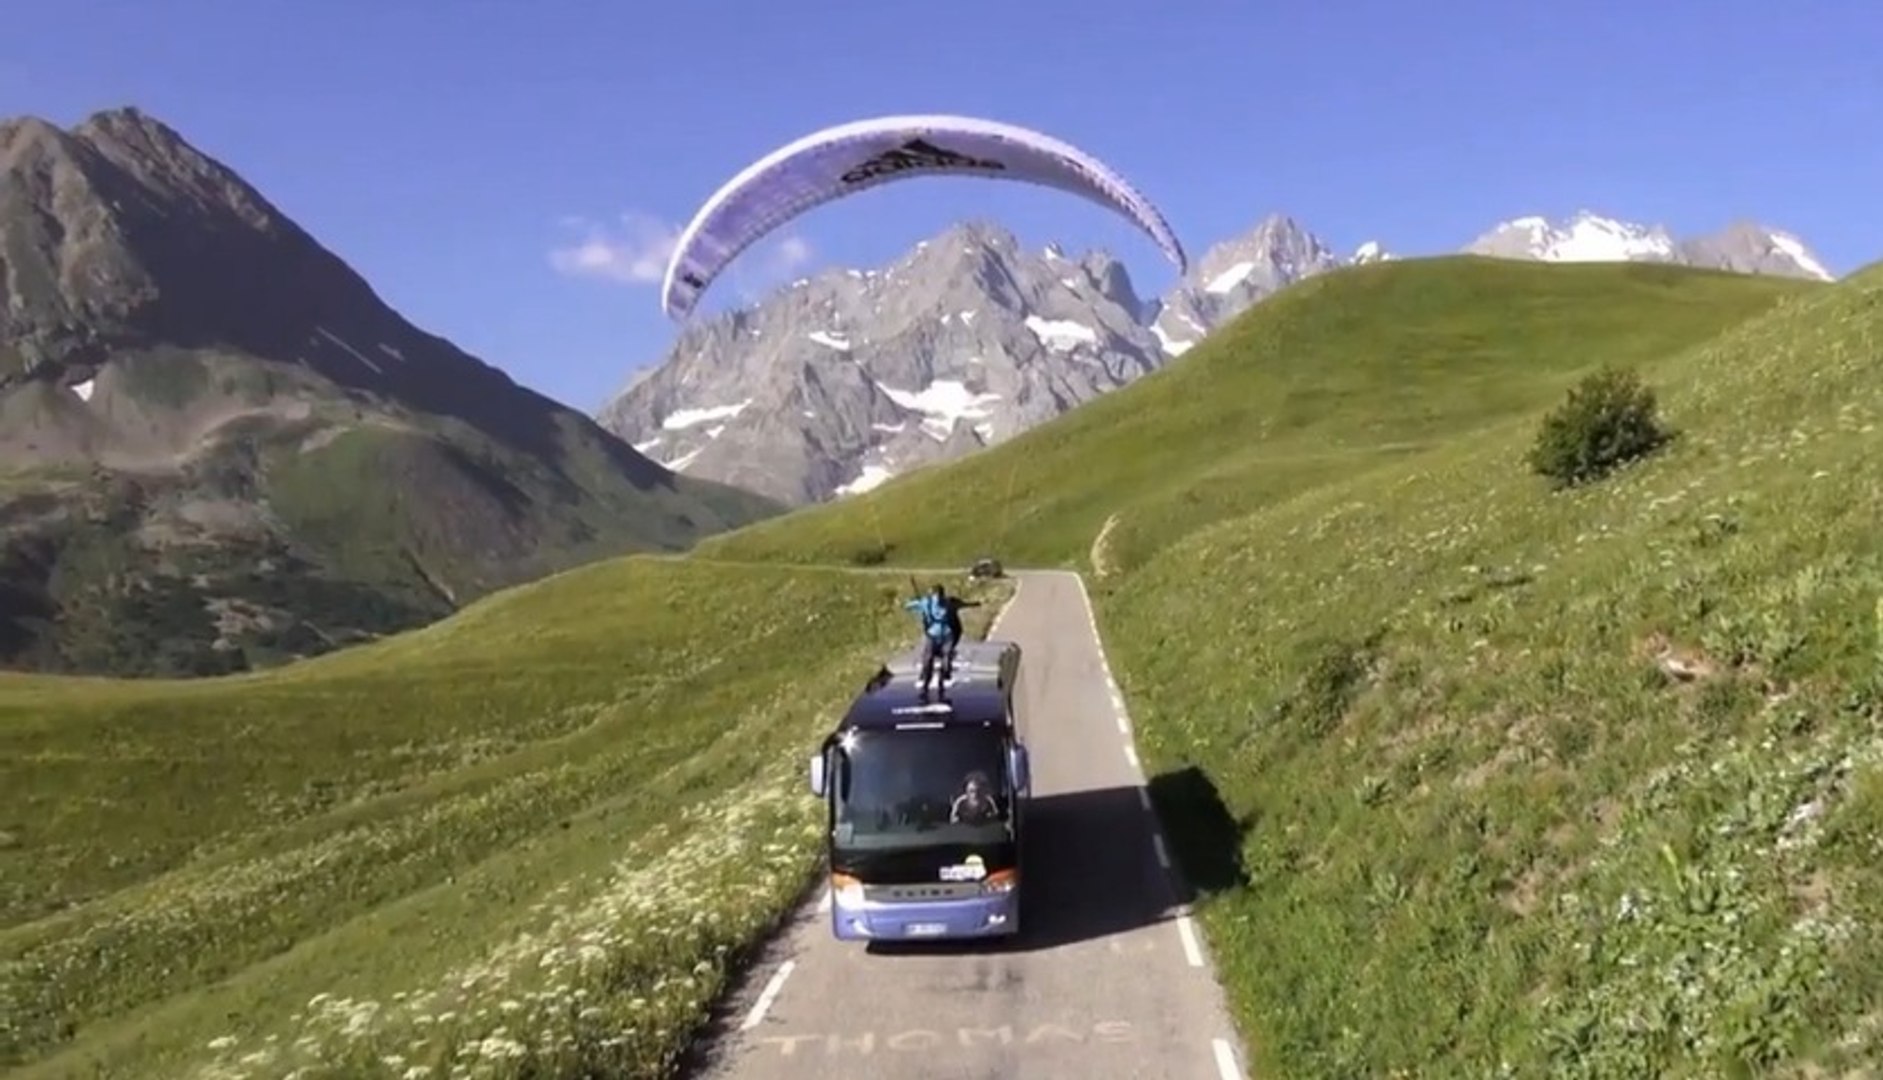 The most impressive Paragliding Session Ever!!! Landing on a Bus!! - Vidéo  Dailymotion